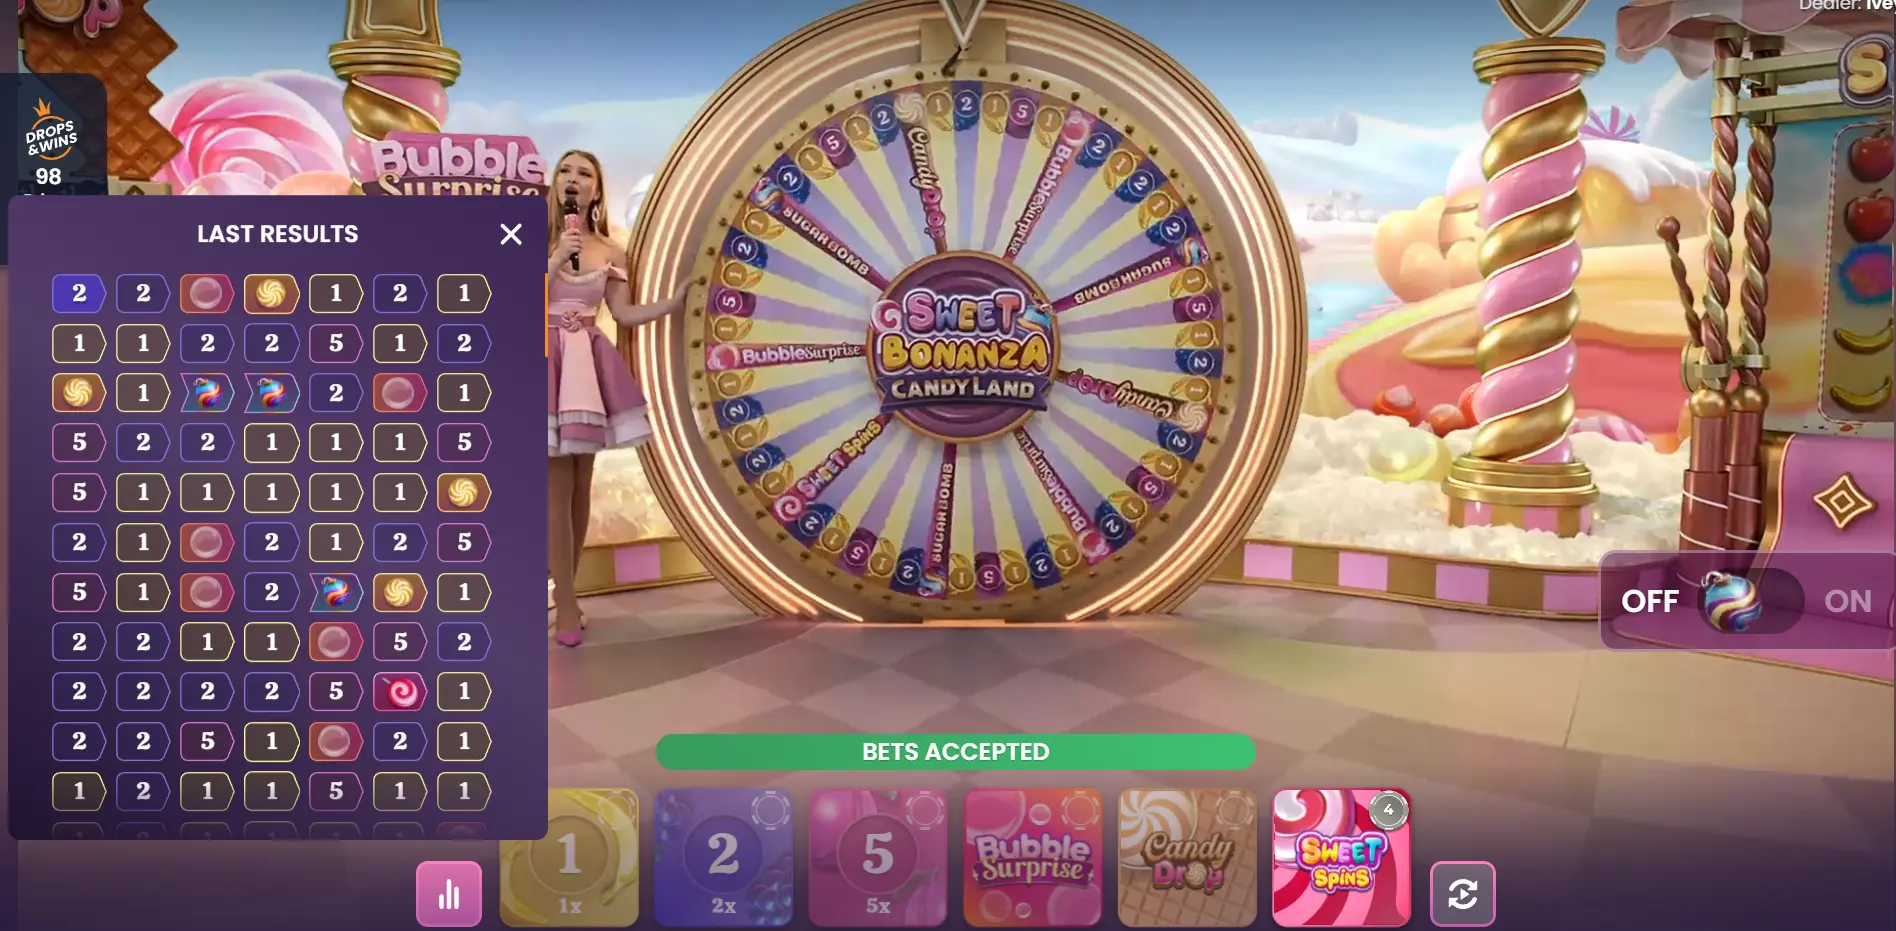 Explore intricate betting tactics and strategic approaches specifically designed for our dedicated Sweet Bonanza CandyLand gameplay.